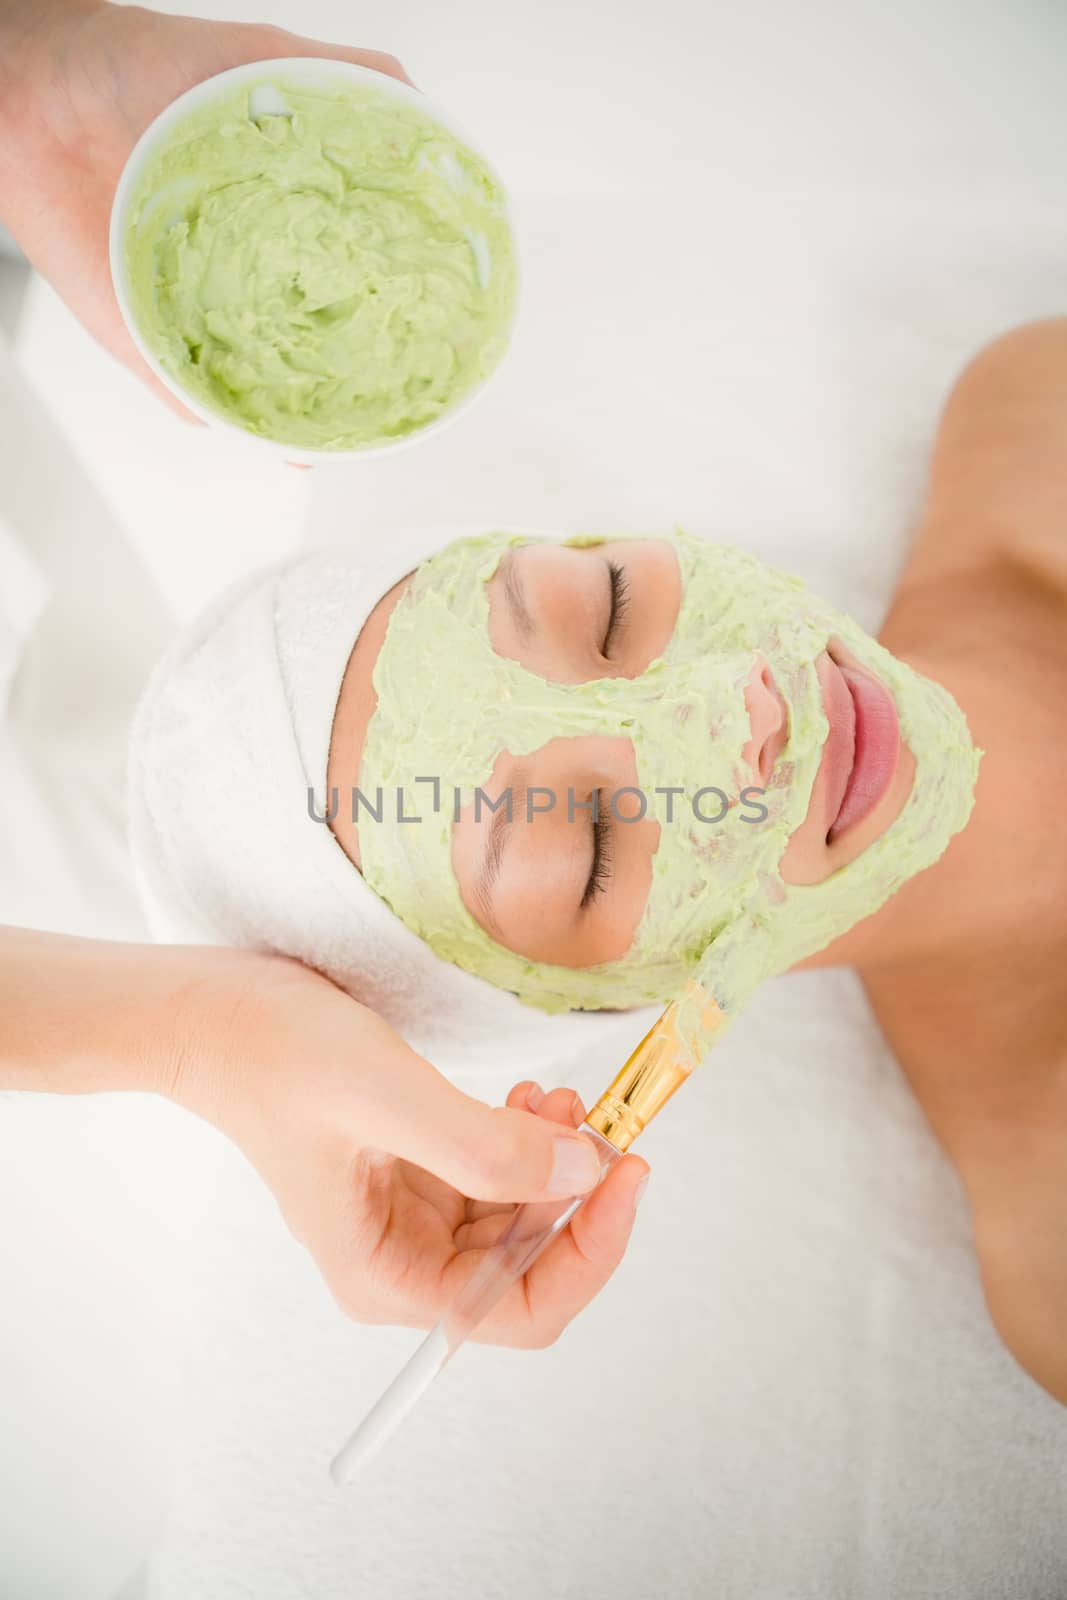 Attractive woman receiving treatment at spa center by Wavebreakmedia